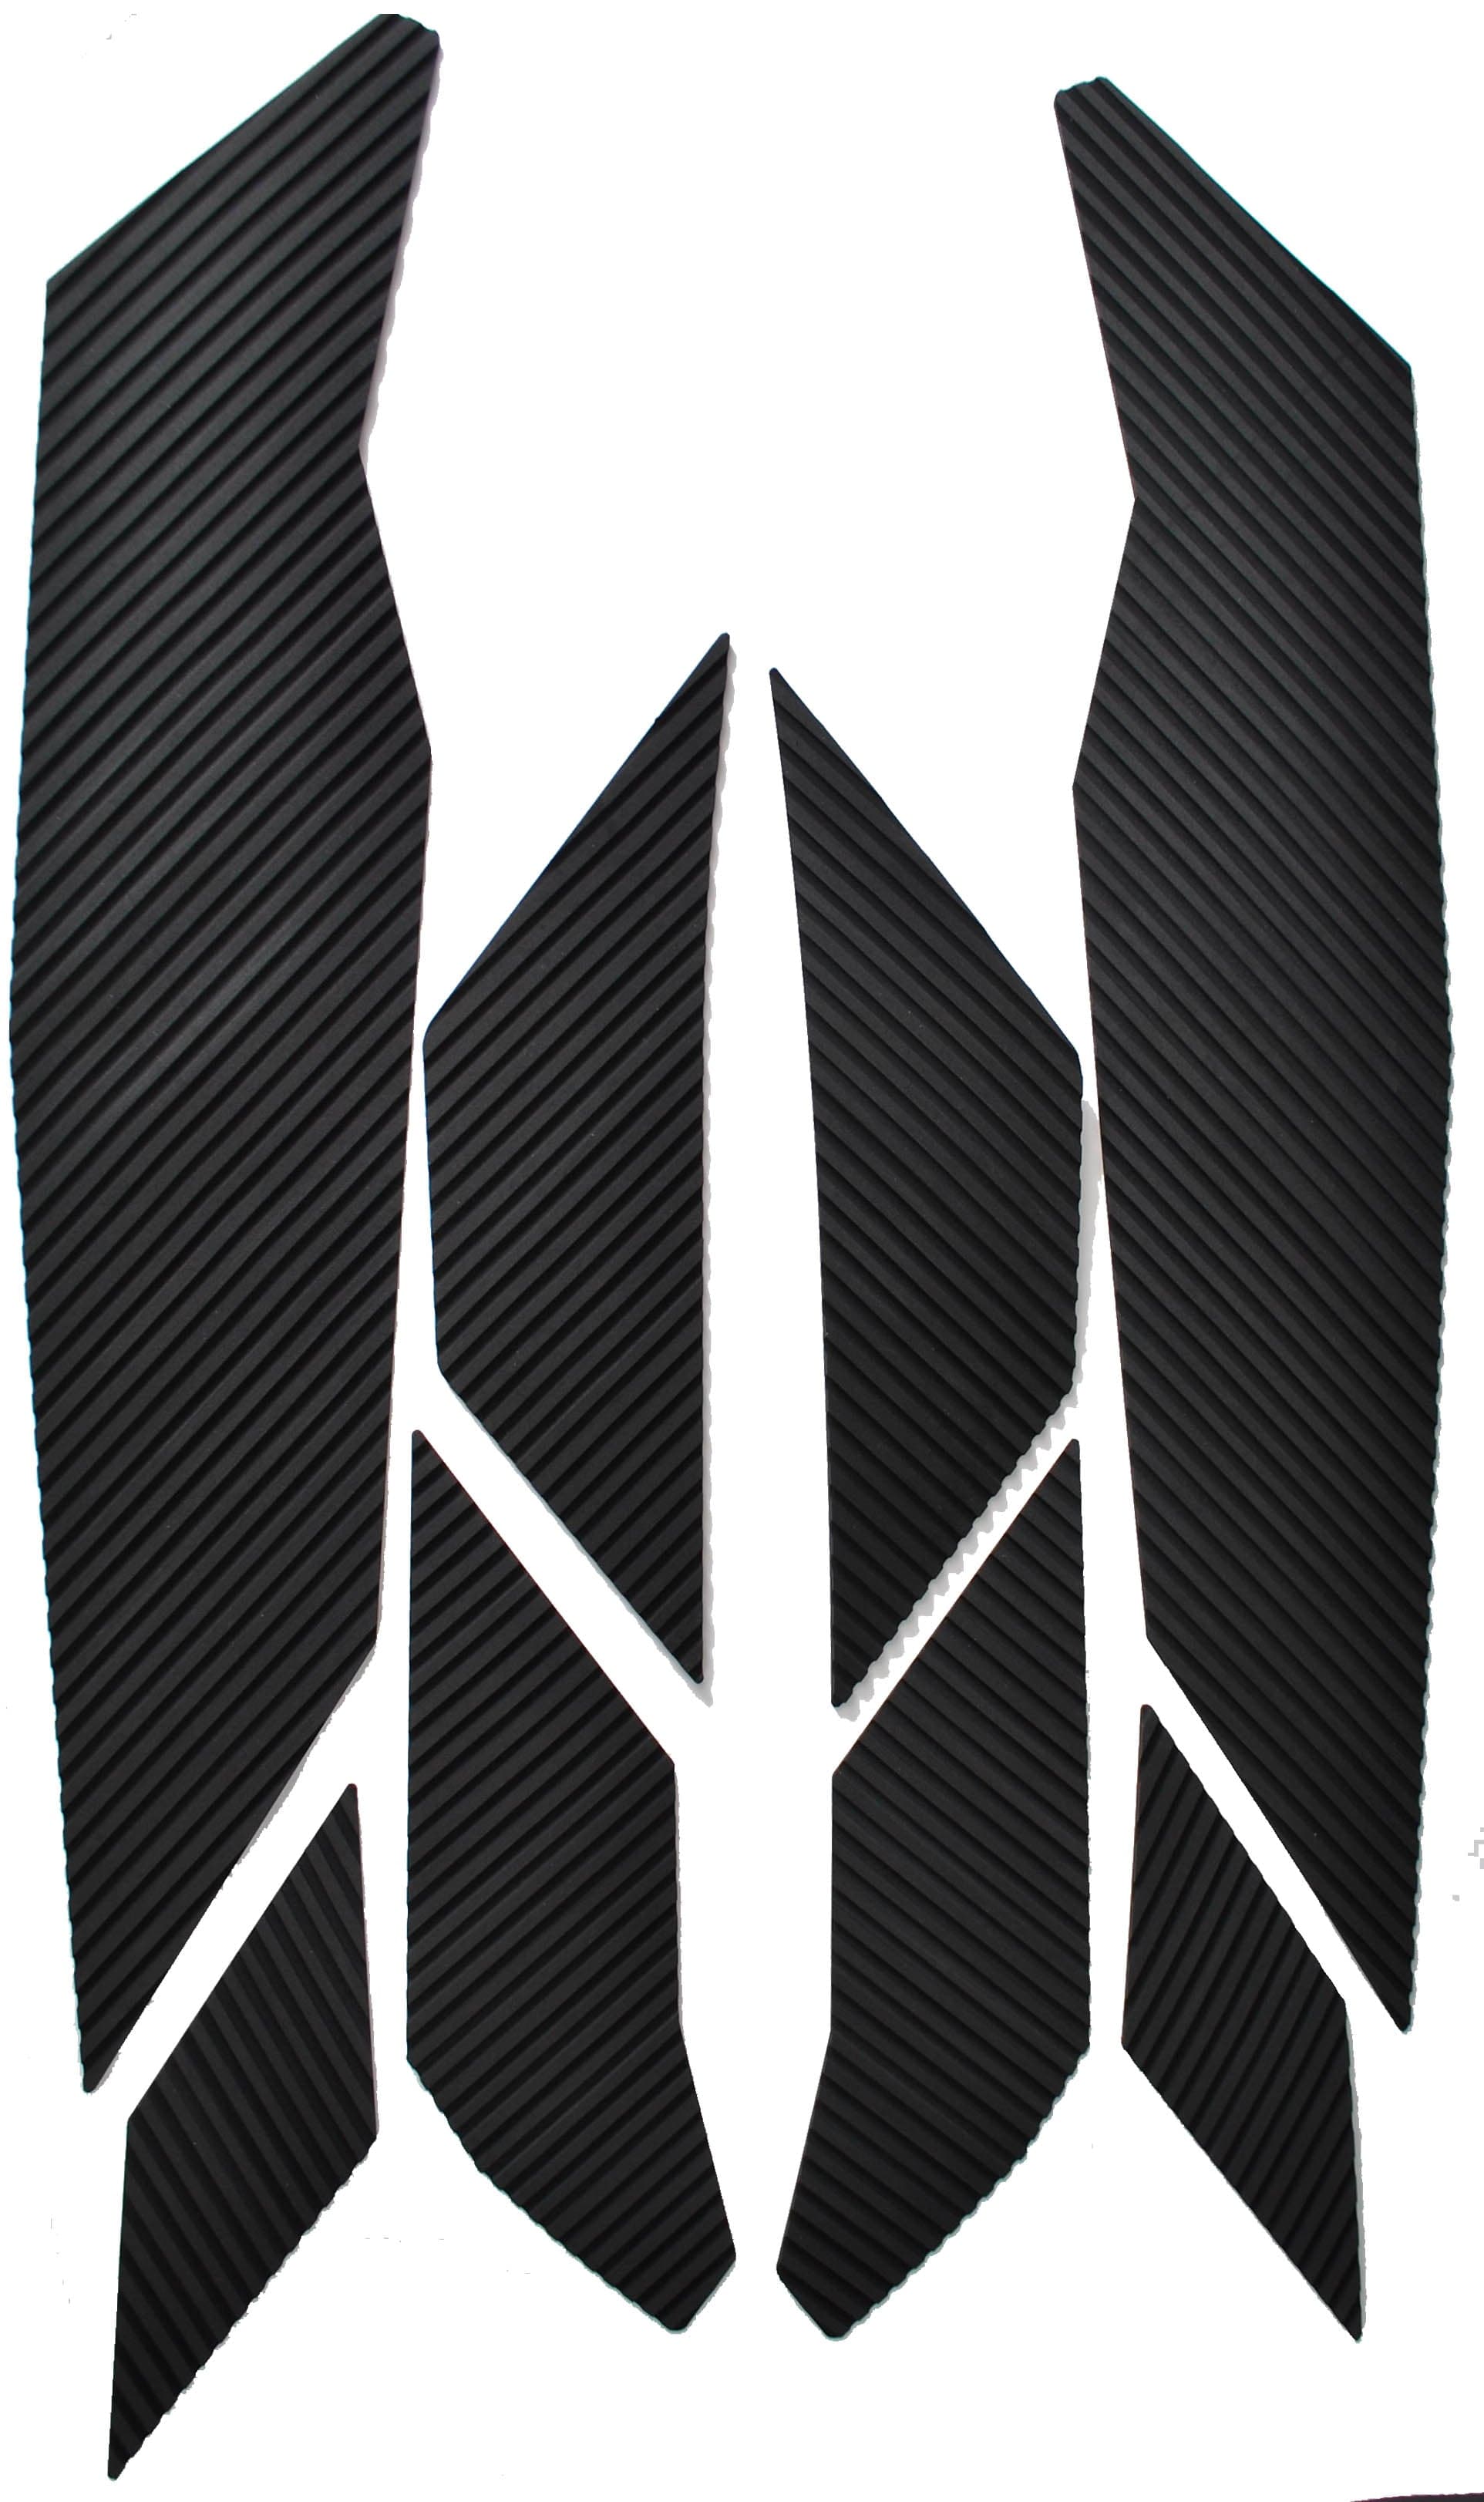 BlackTip JetSports Traction Mats For Sea-Doo 2014-2020 Spark 2 person traction mats